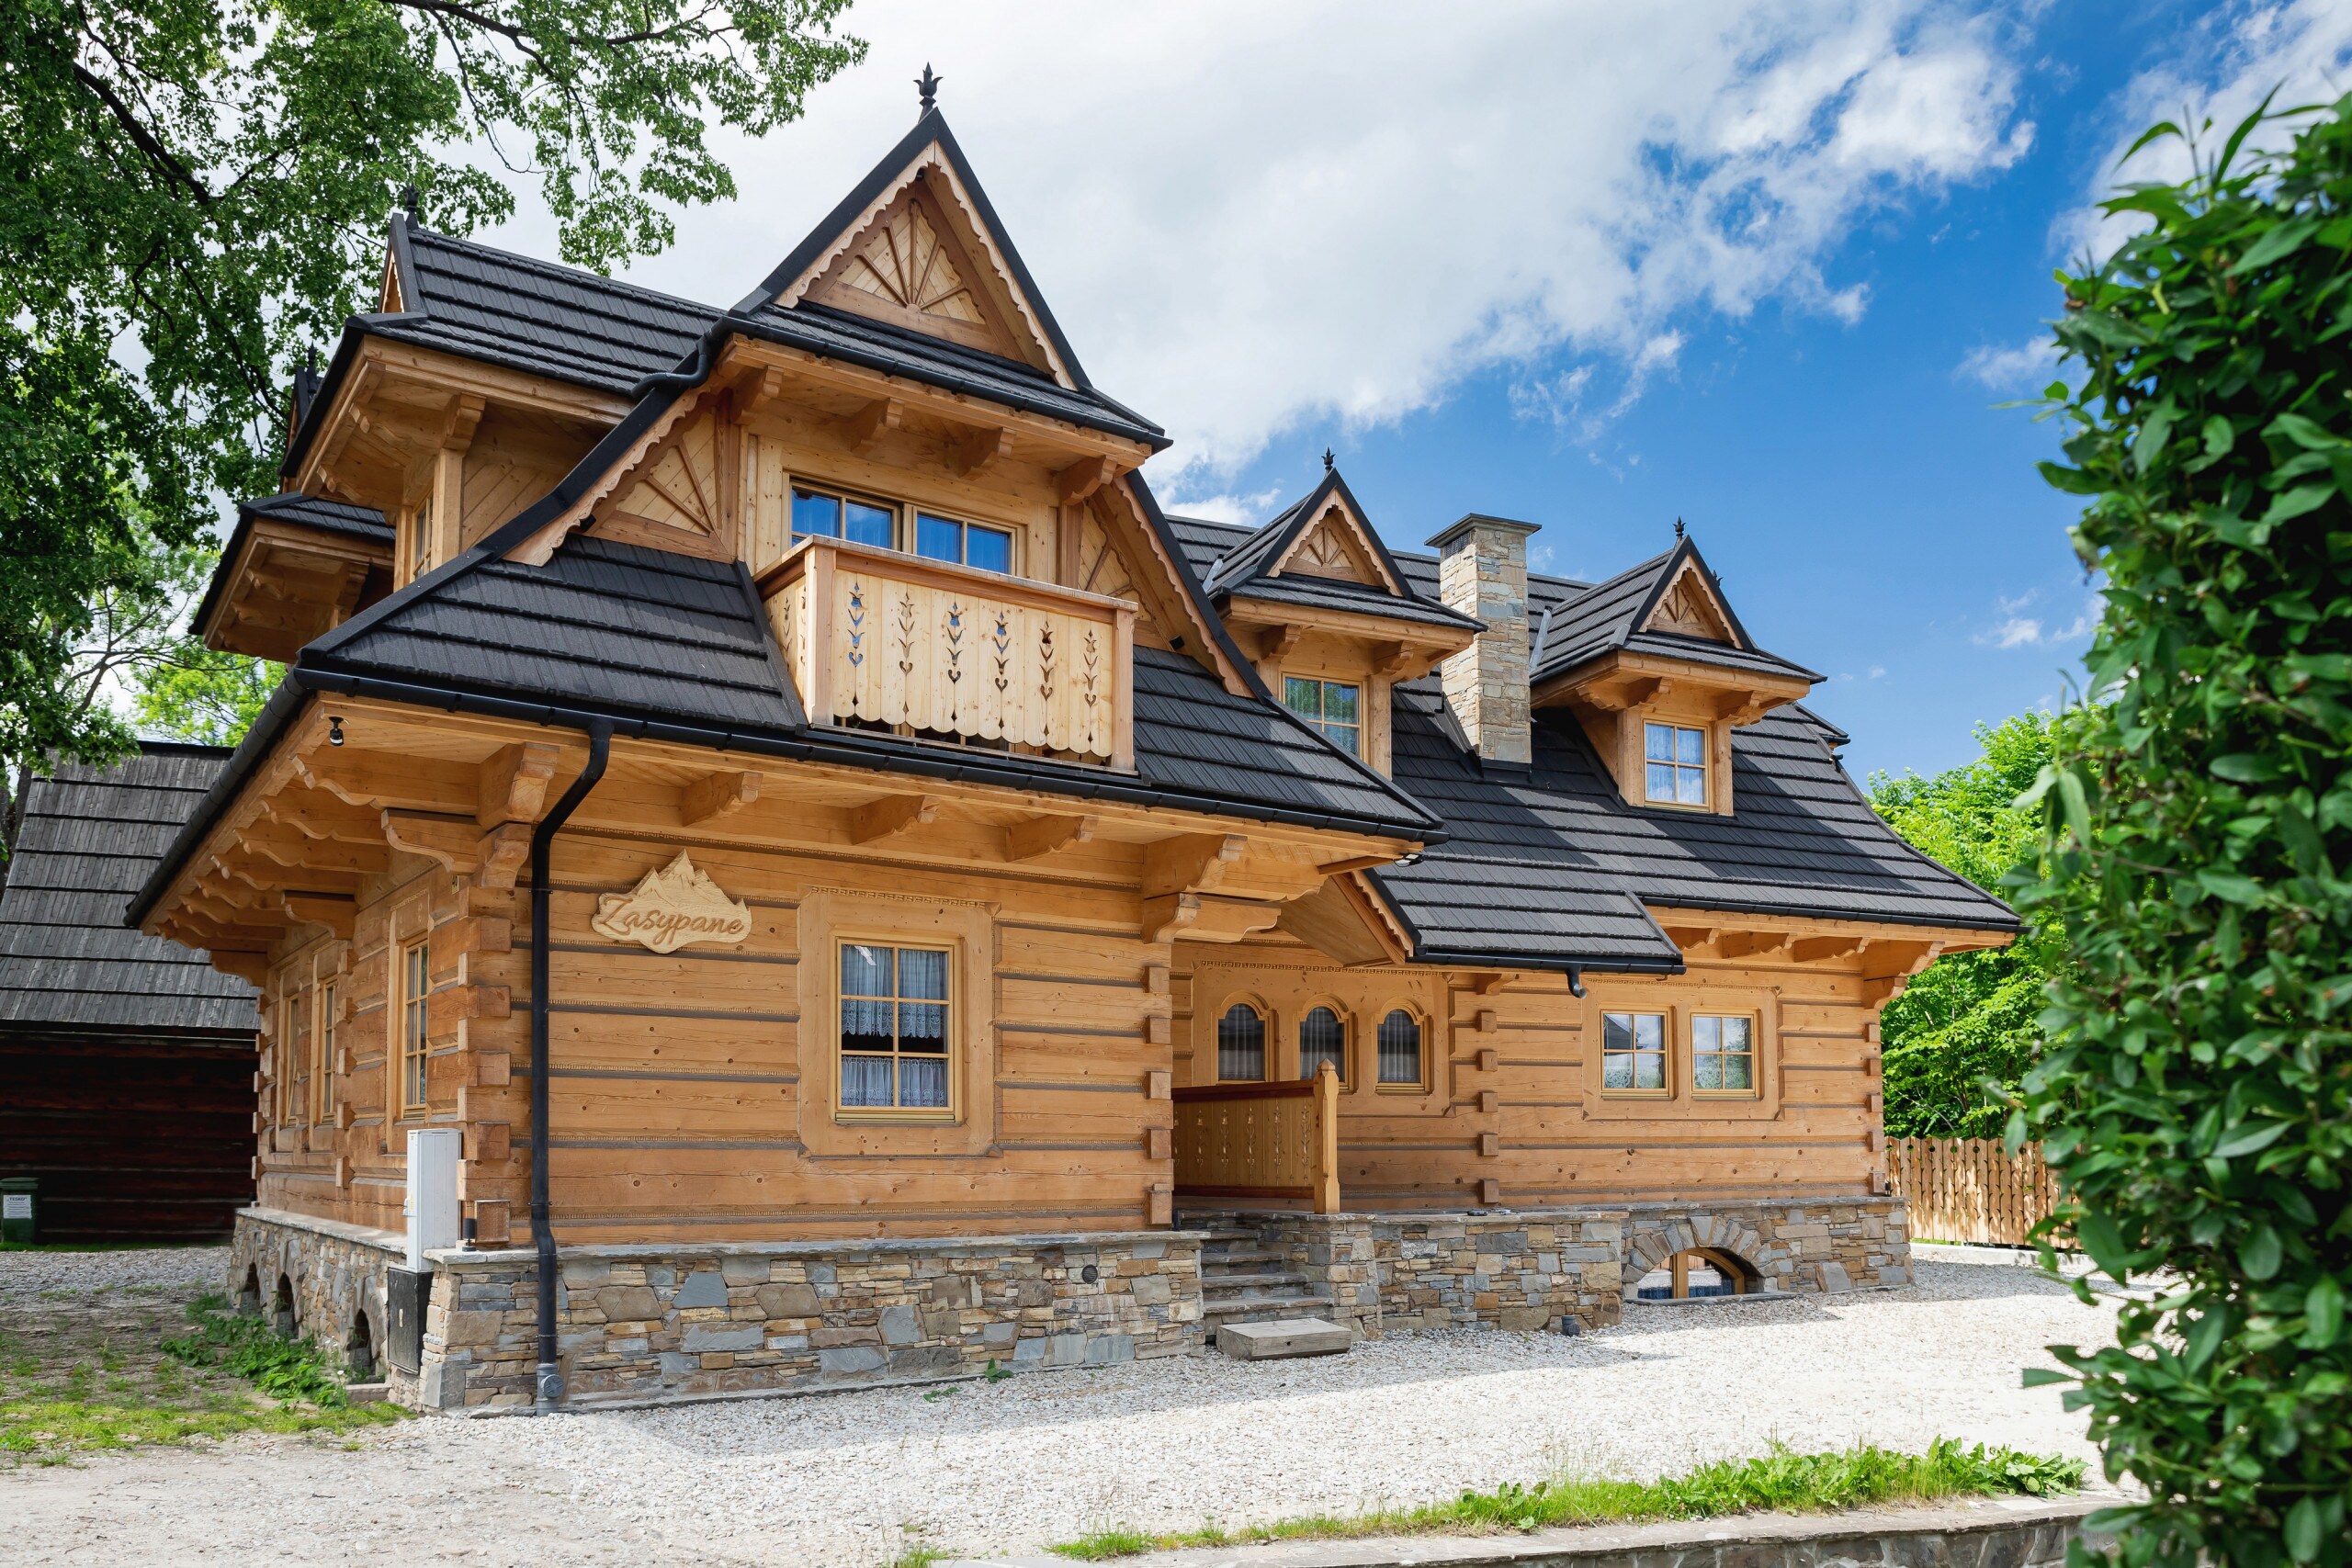 Rent a highlander house in the heart of Zakopane! Our spacious house in a highlander style can accommodate up to 14 people and offers an unforgettable atmosphere of holidays in the mountains. It is located in an attractive neighborhood of many monuments and one of the oldest streets of the city.